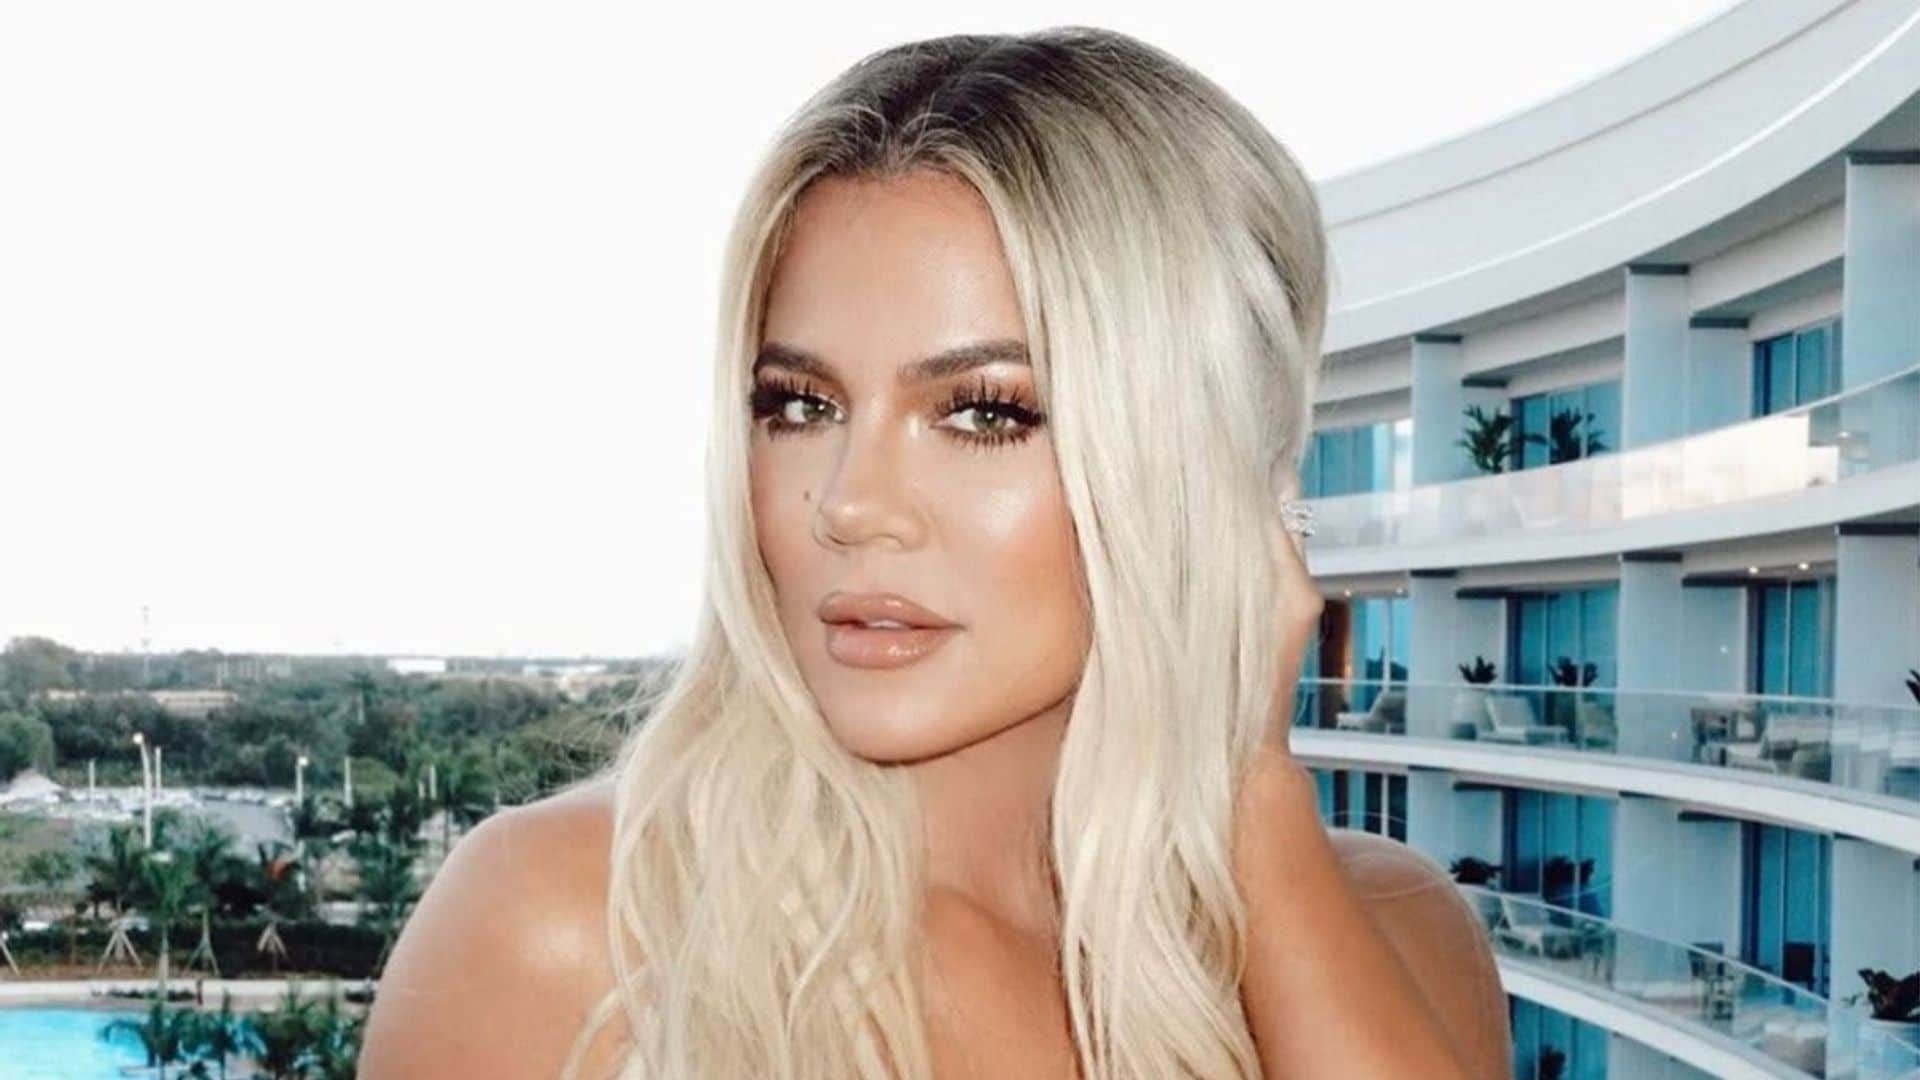 Khloe Kardashian happily said she found “The One” in her latest Instagram post